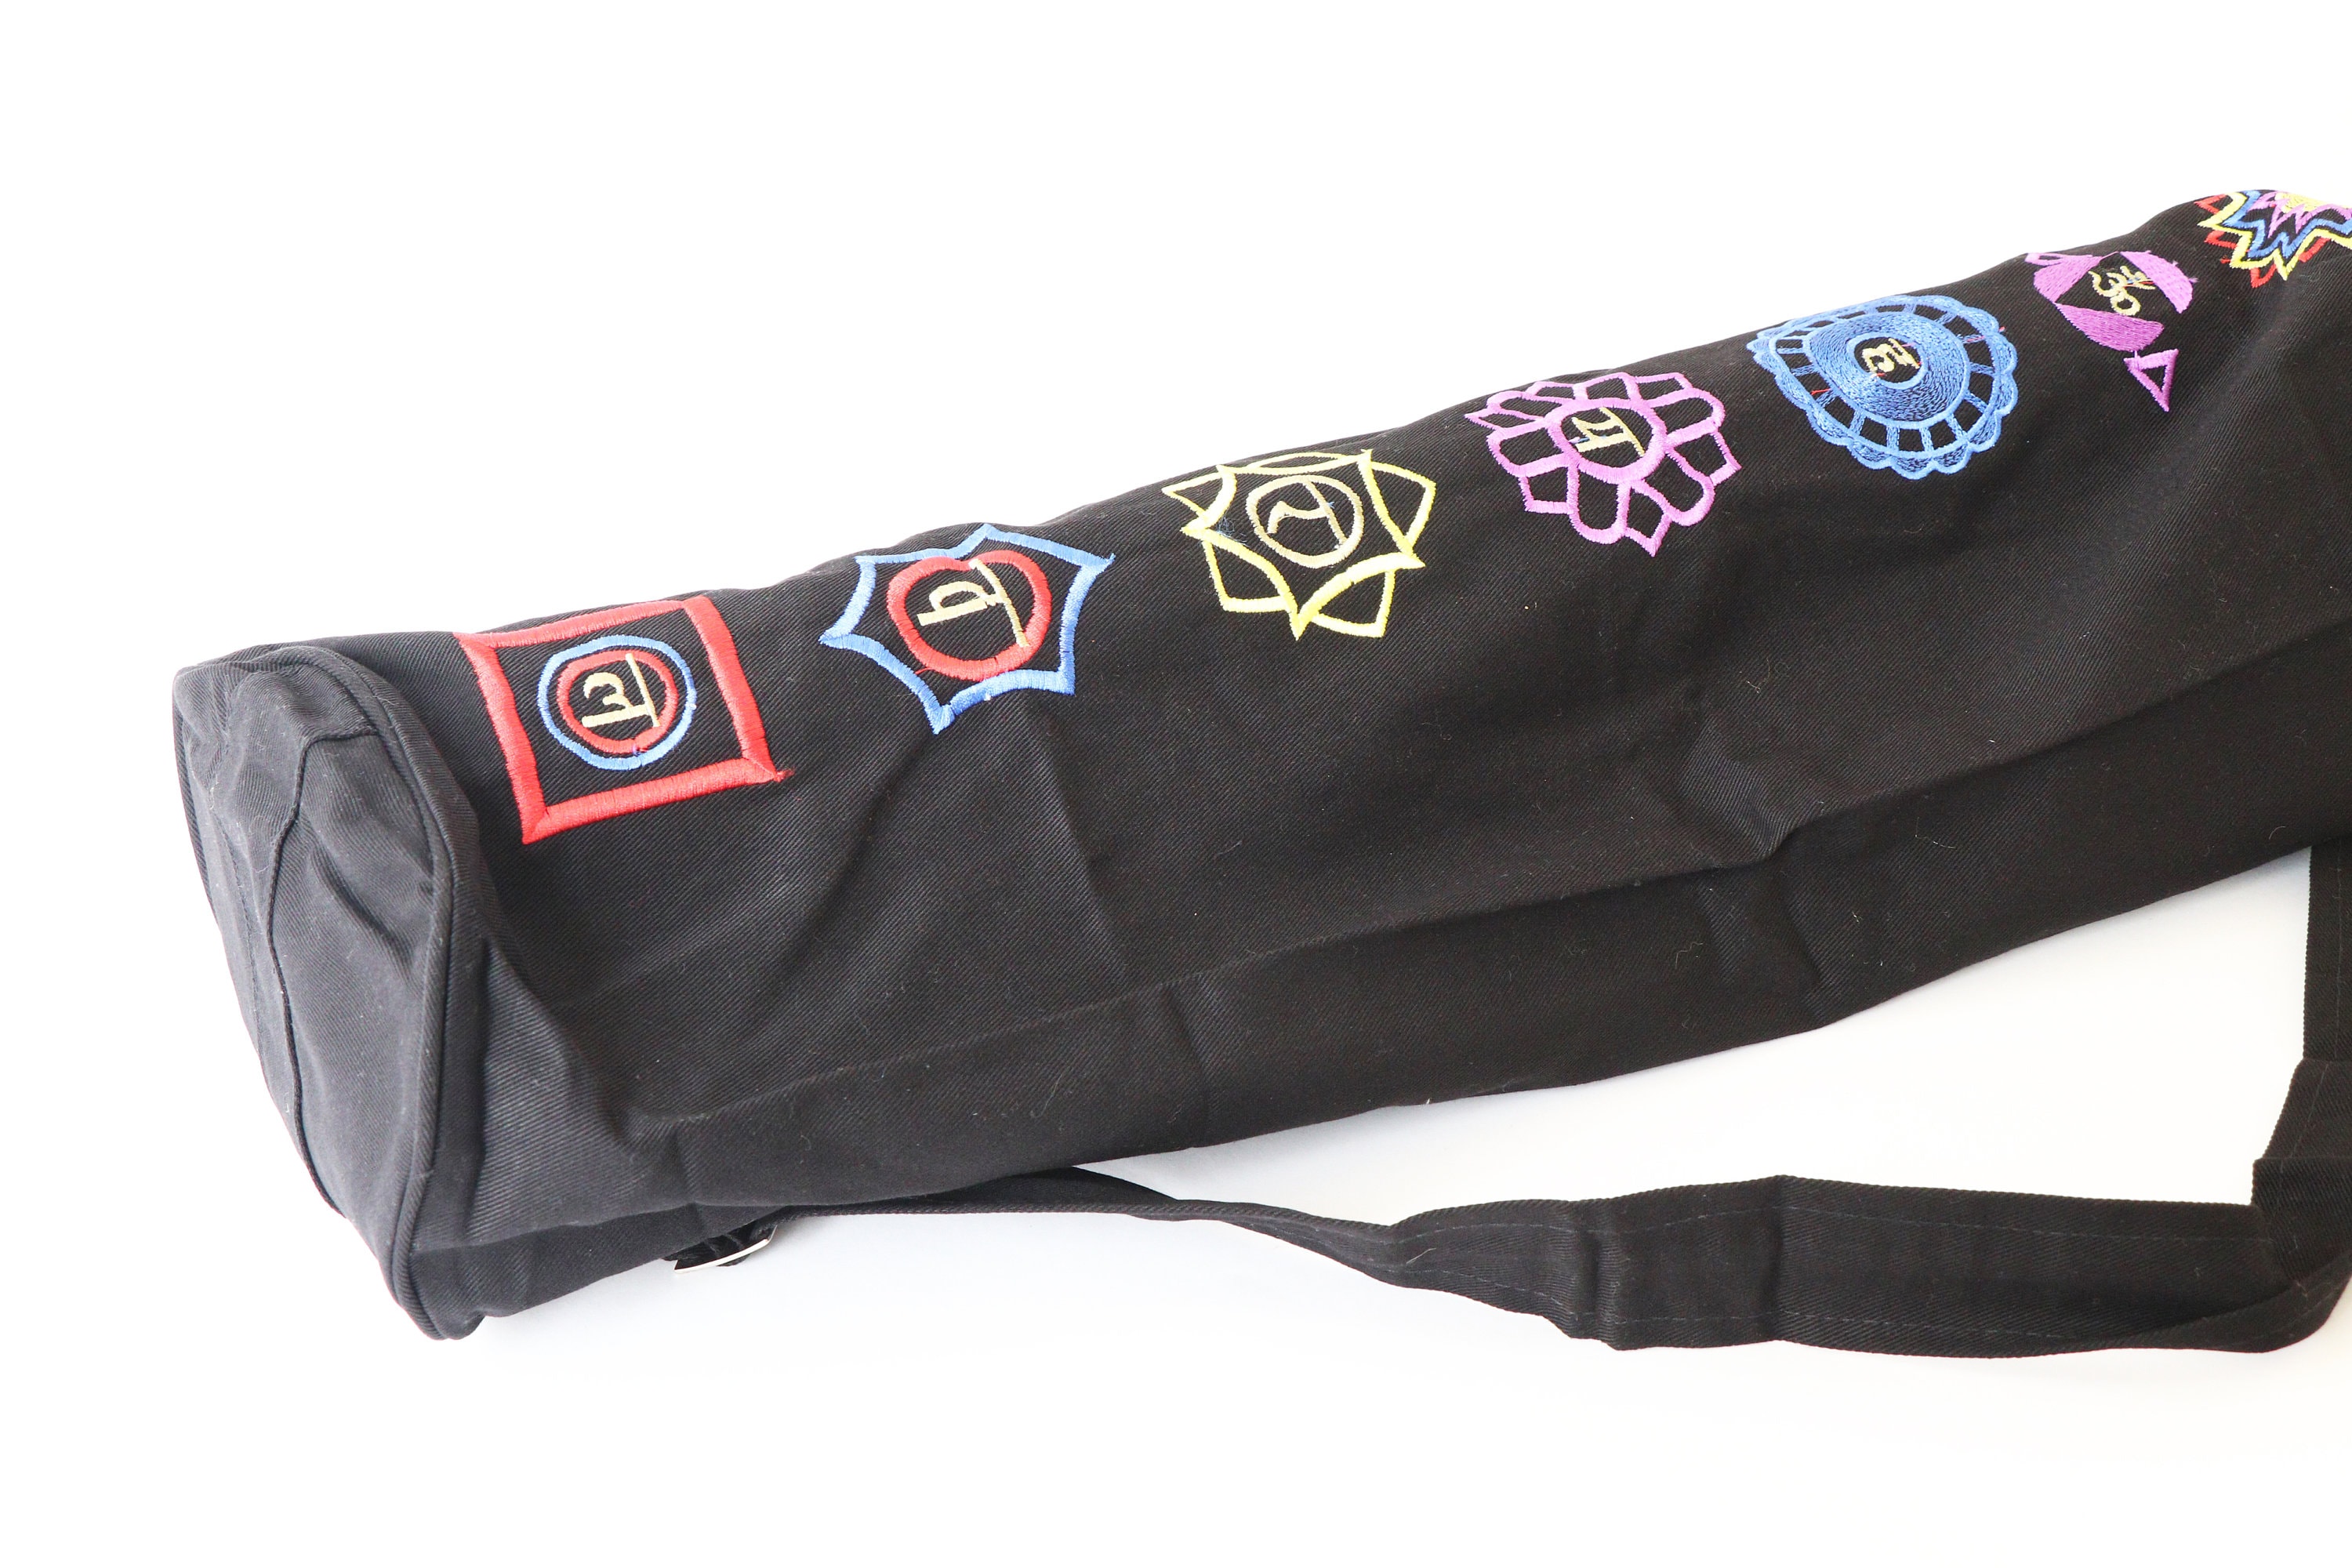 Canvas Yoga Mat Cover Manufacturer, Supplier, Wholesaler in Ghaziabad, India